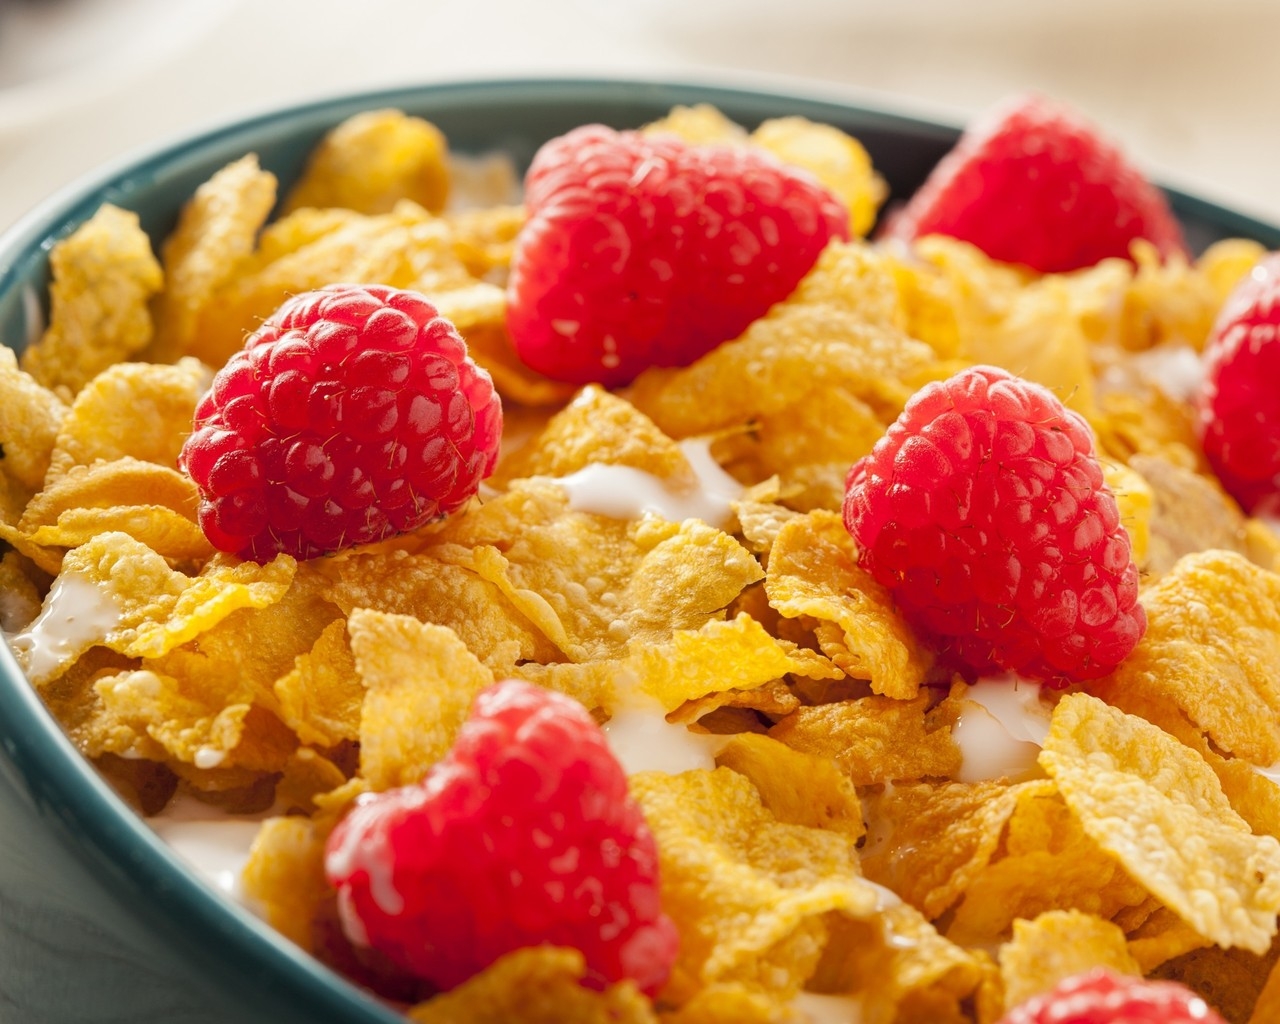 Cereals with Raspberries  for 1280 x 1024 resolution